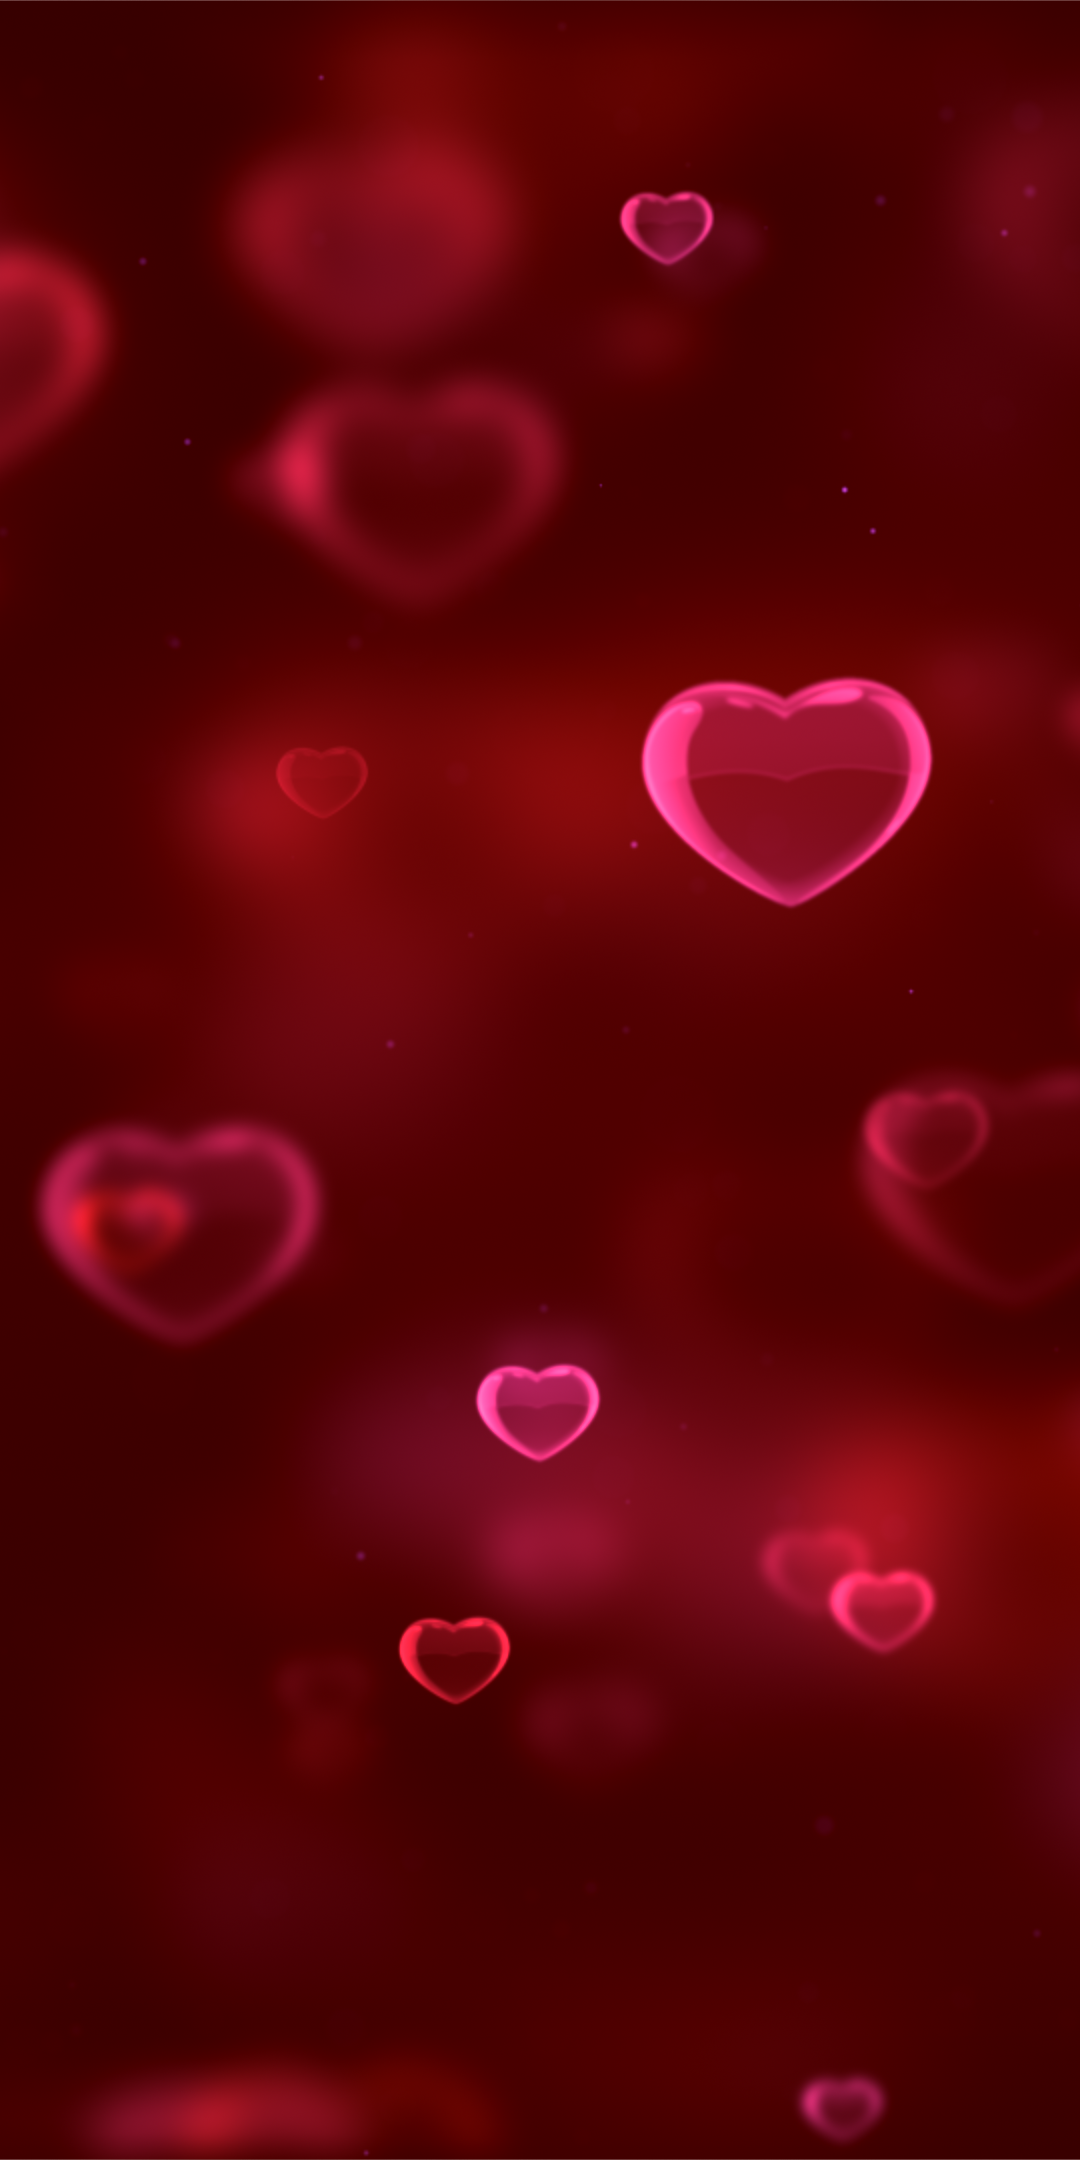 Love, red hearts, girly pink, blur, 1080x2160 wallpaper. Pink